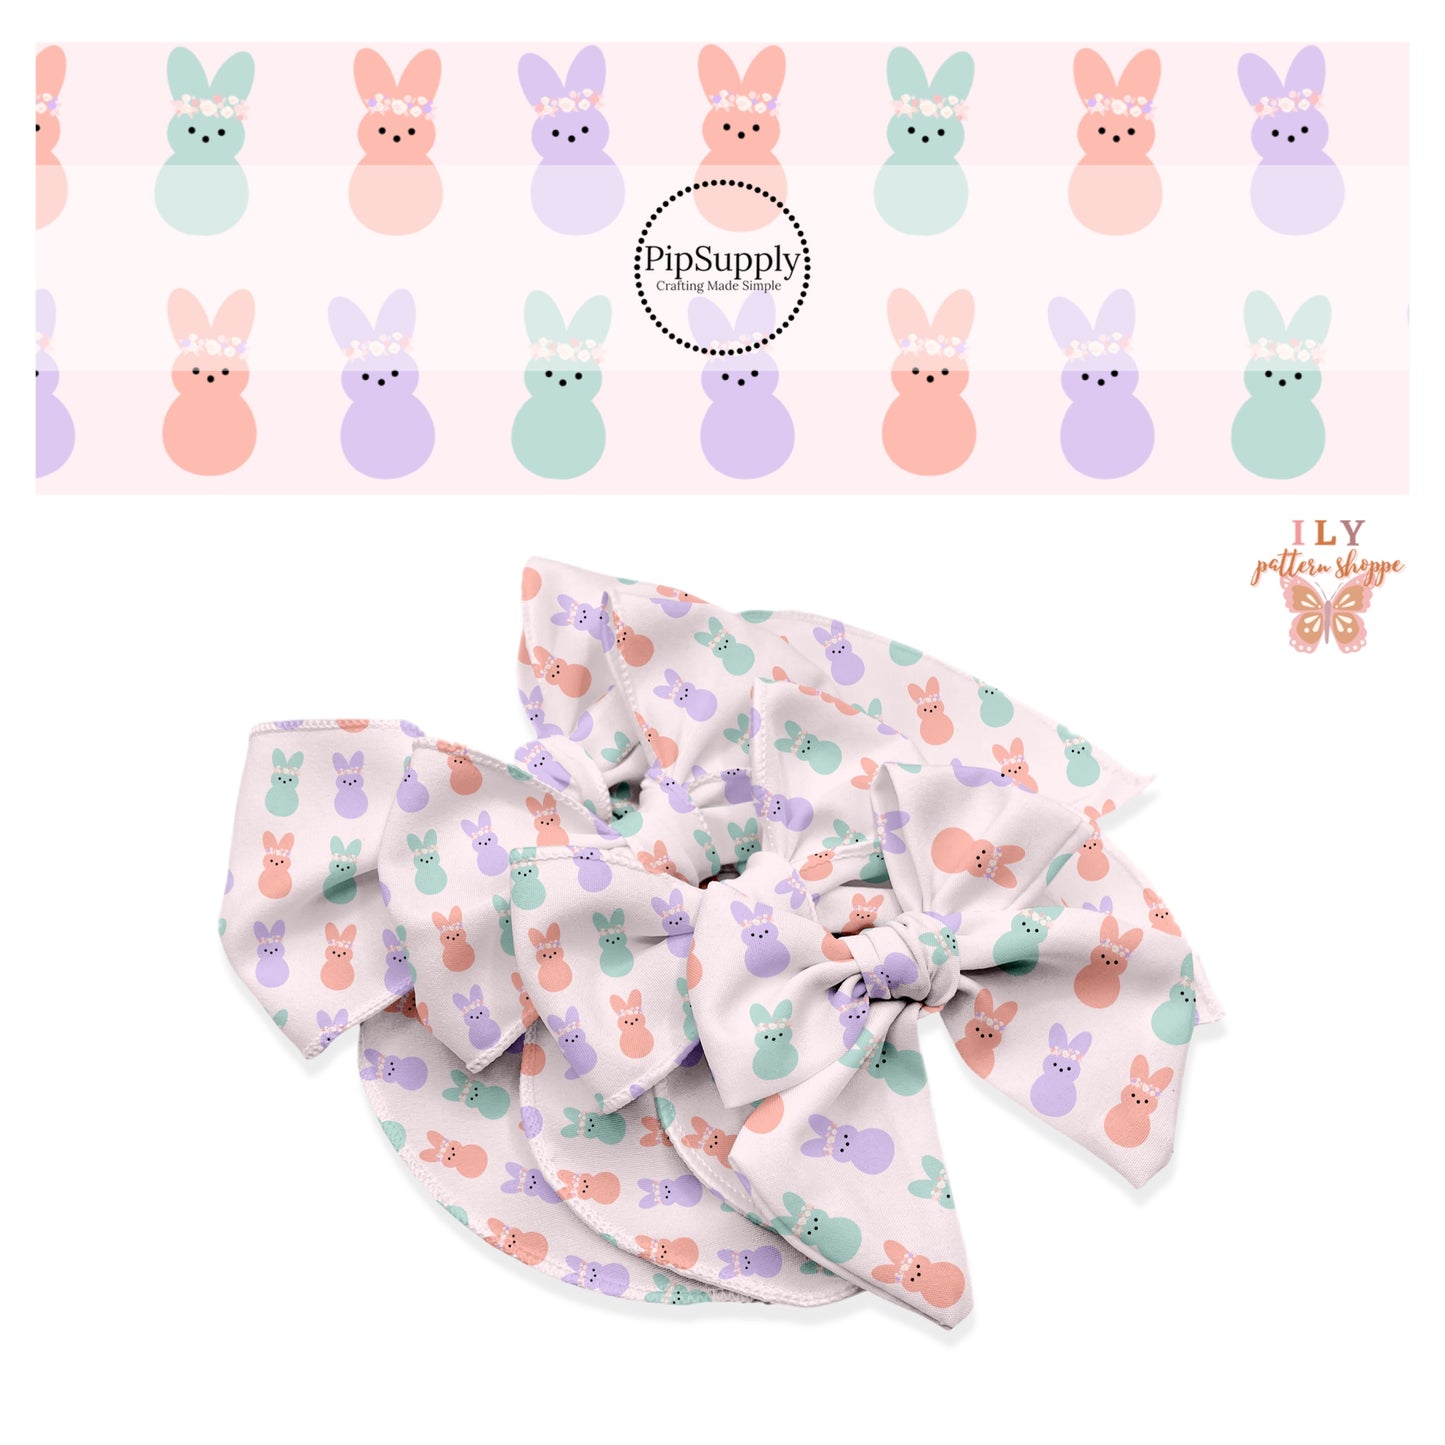 Pink, purple, and aqua marshmallow bunnies with floral crowns on light pink bow strips